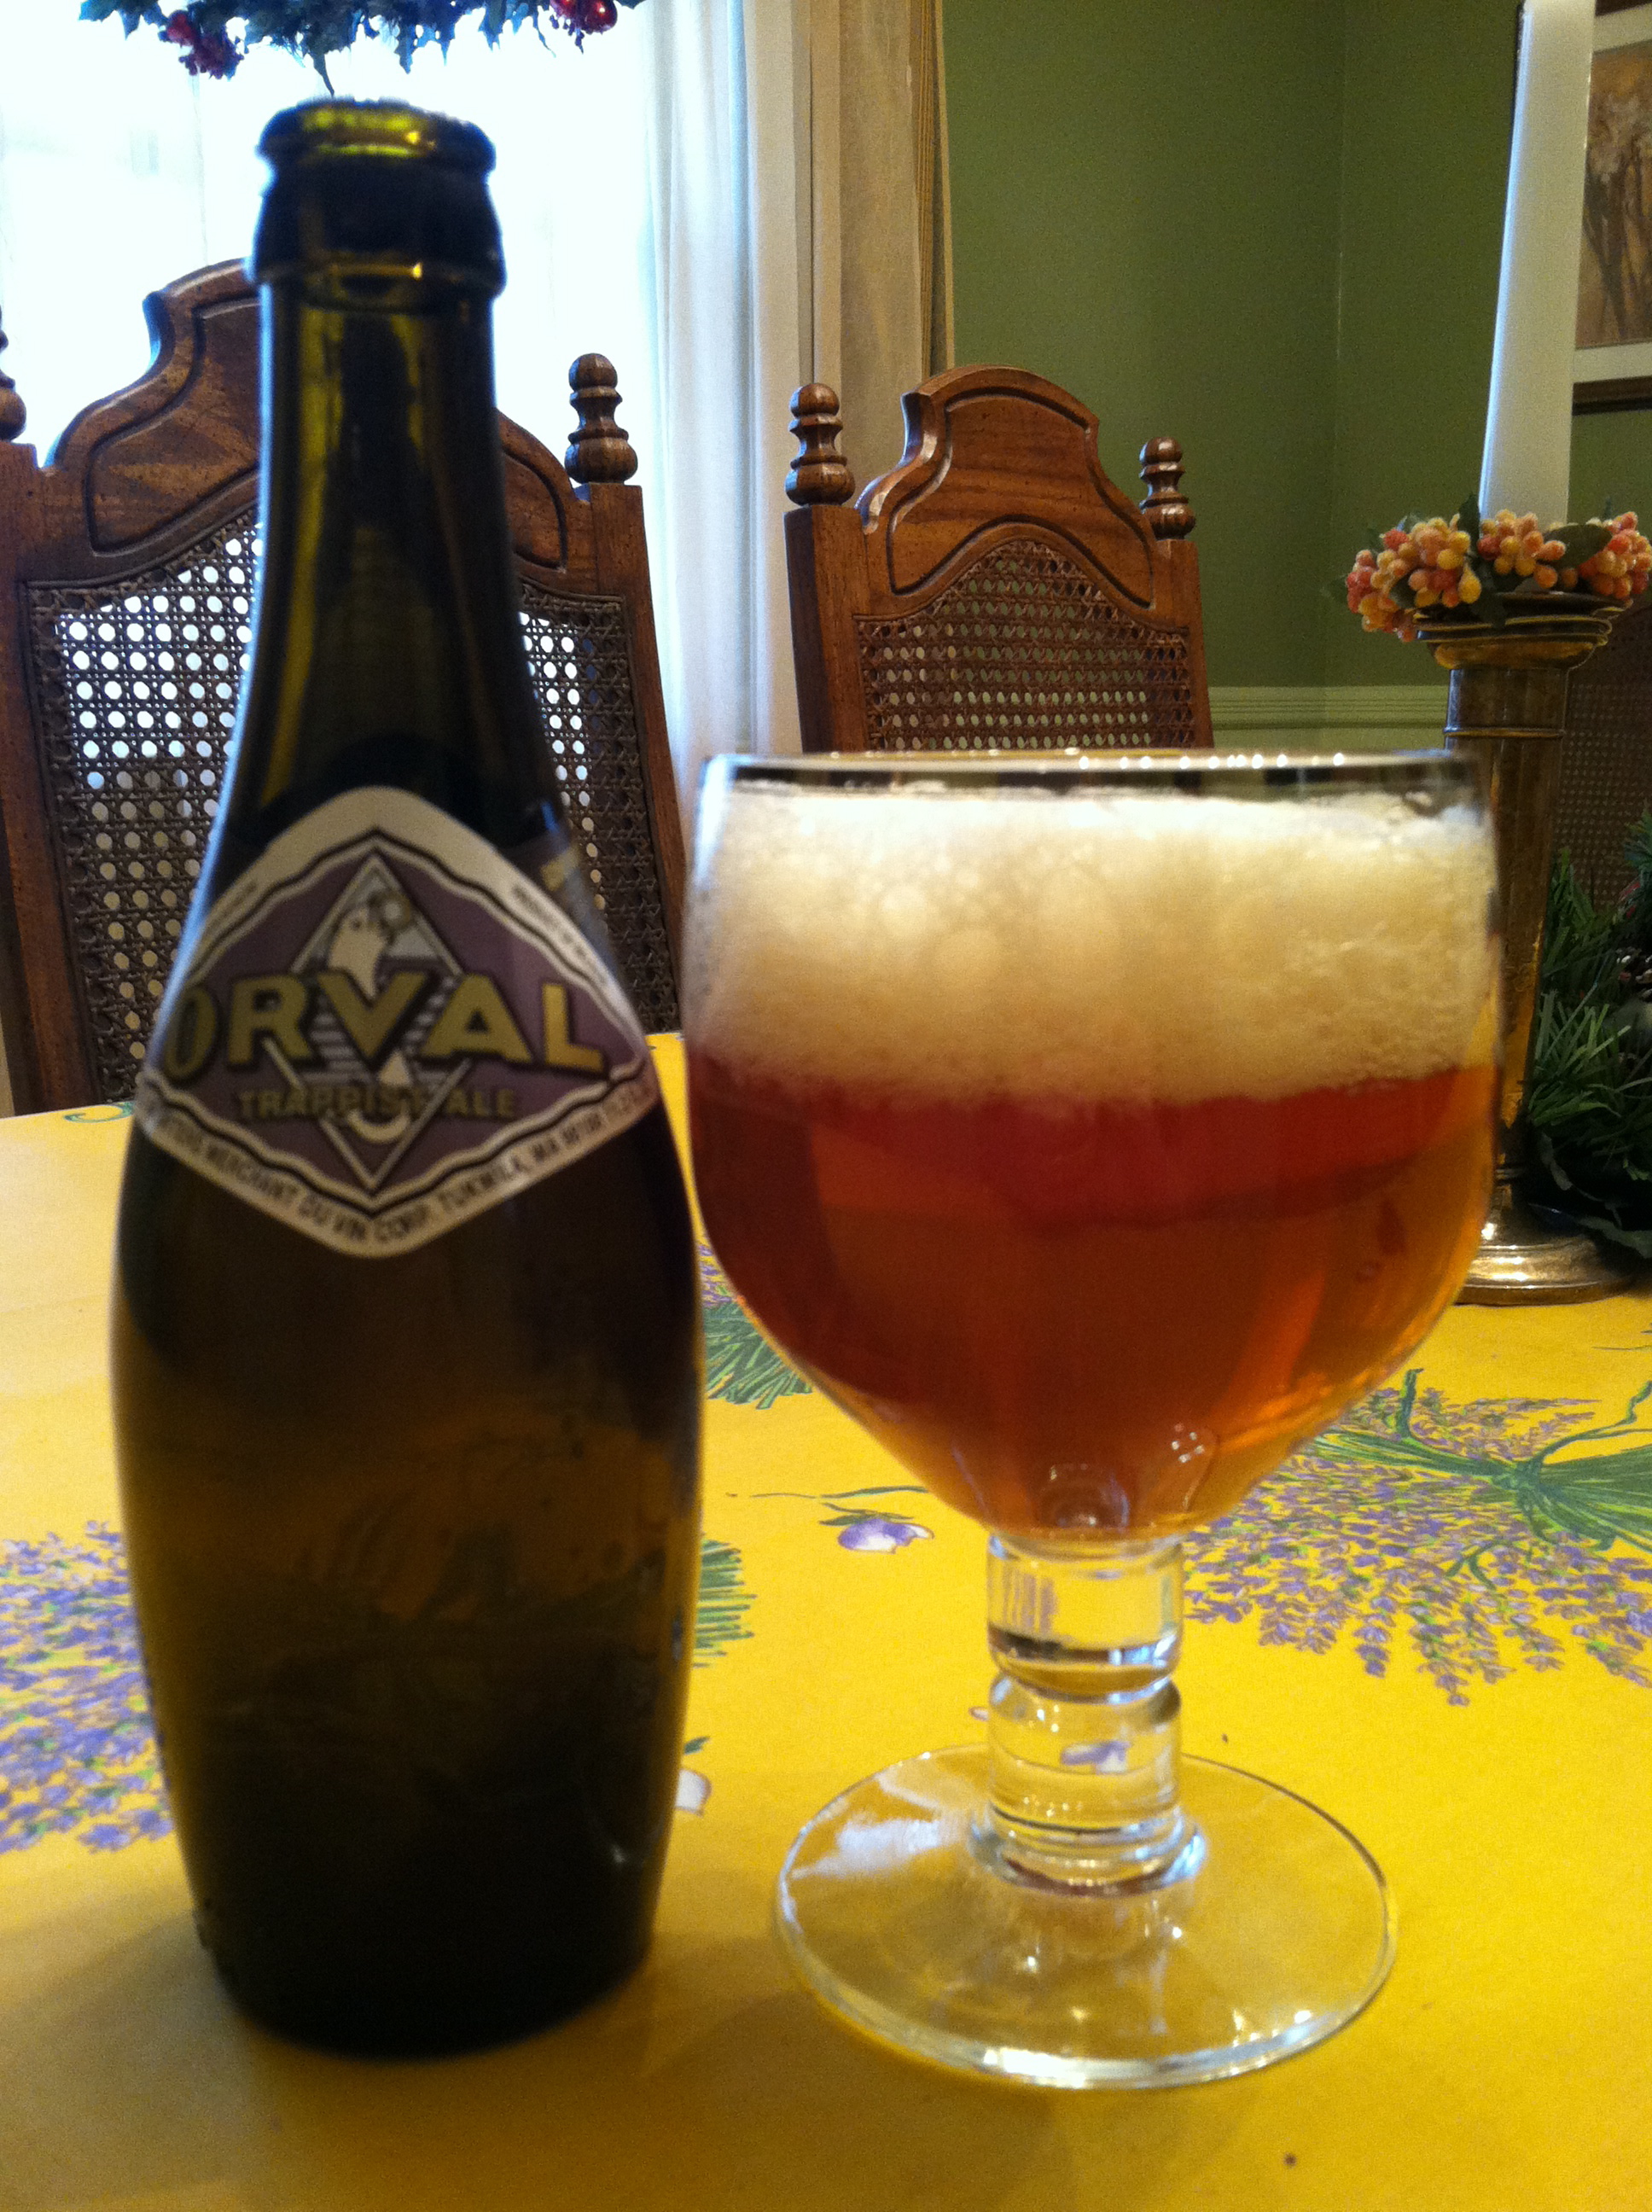 Orval Trappist Ale.